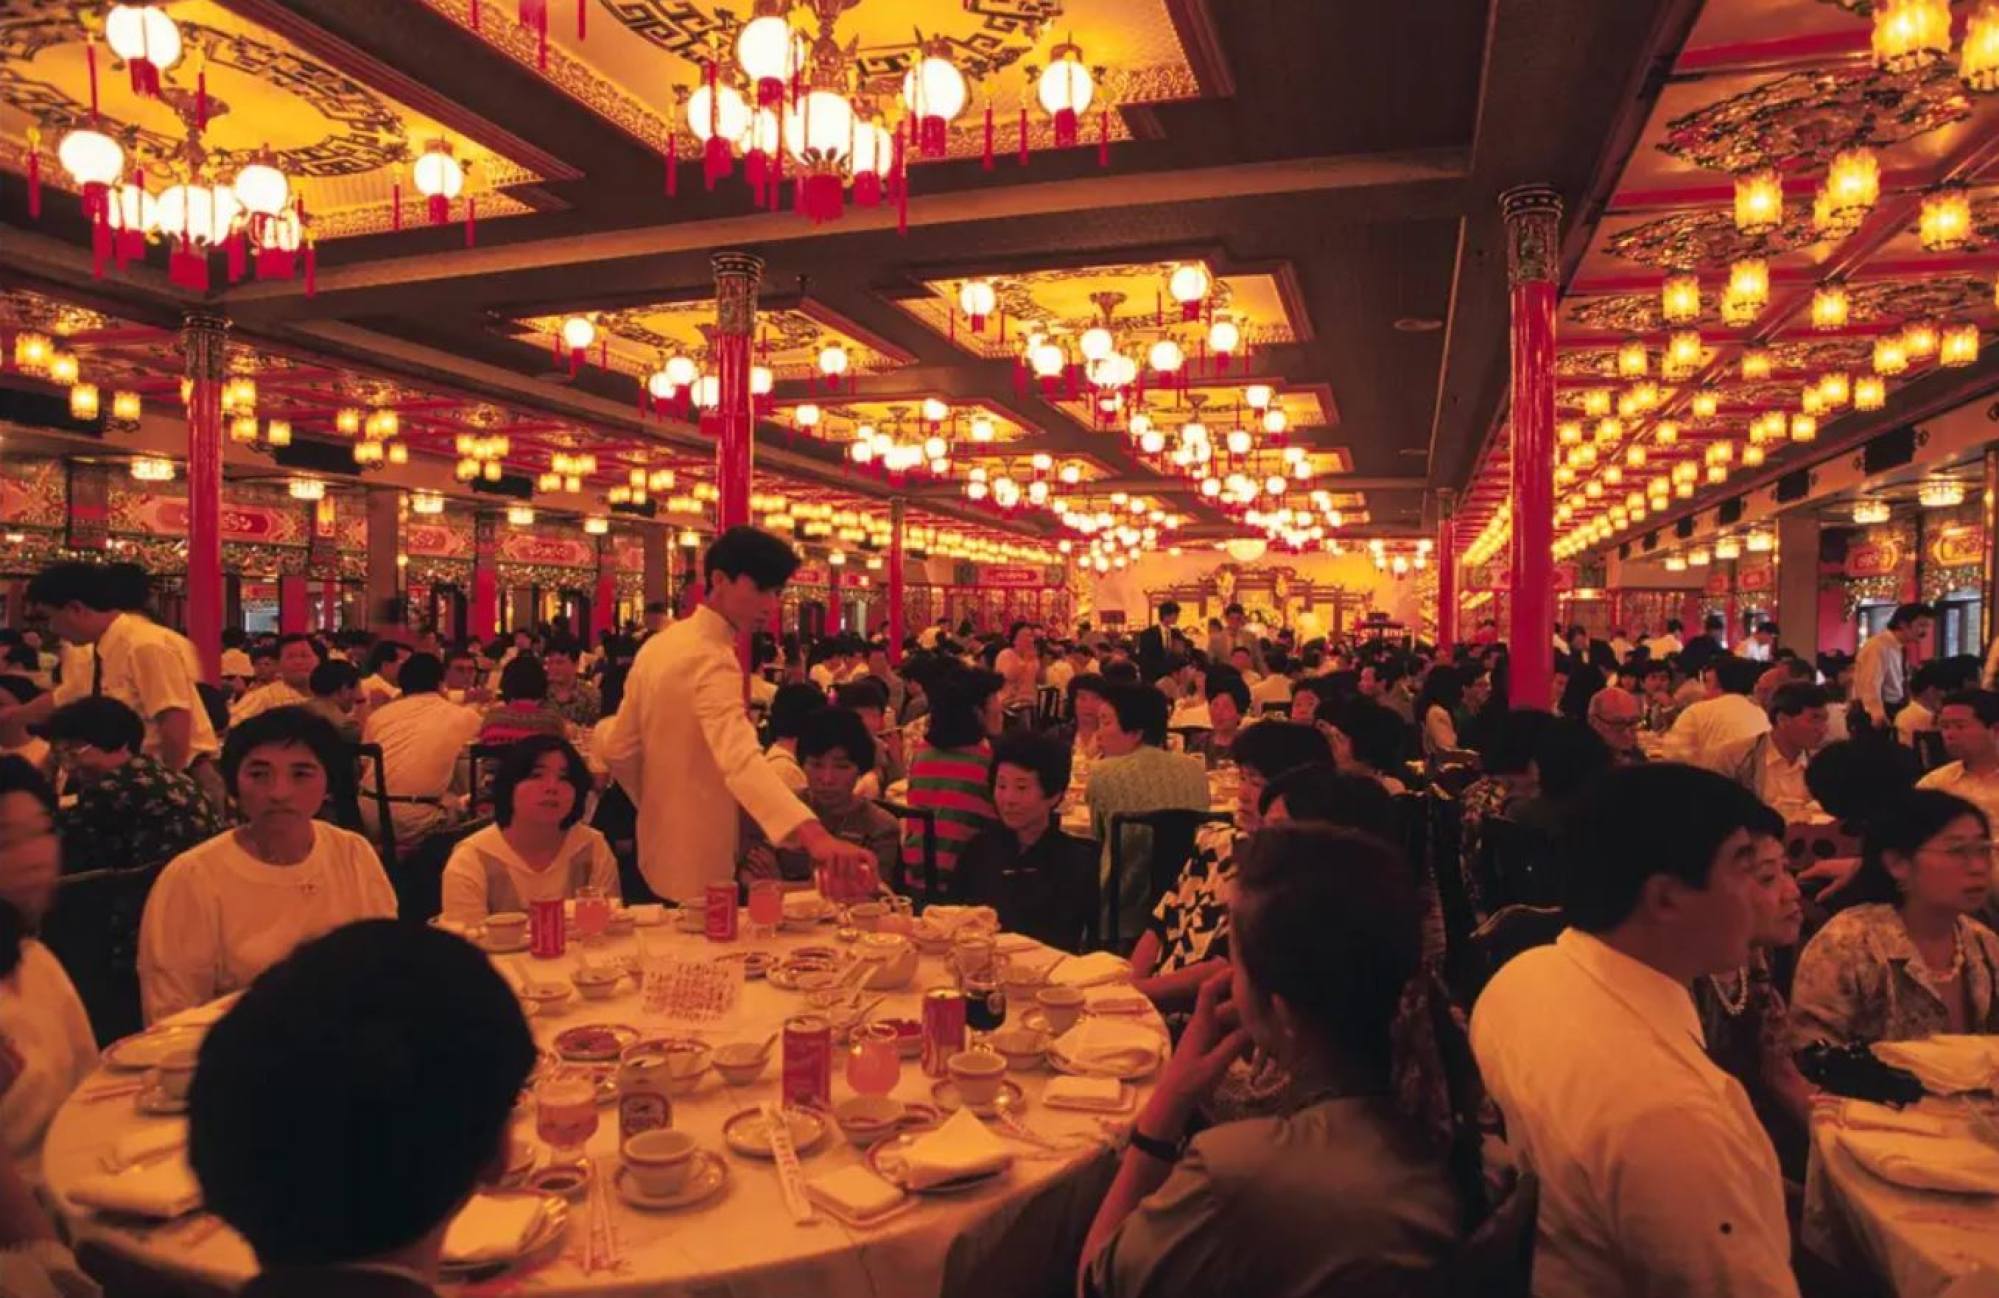 Jumbo Restaurant in Hong Kong could seat up to 2,300 diners. Photo: Getty Images